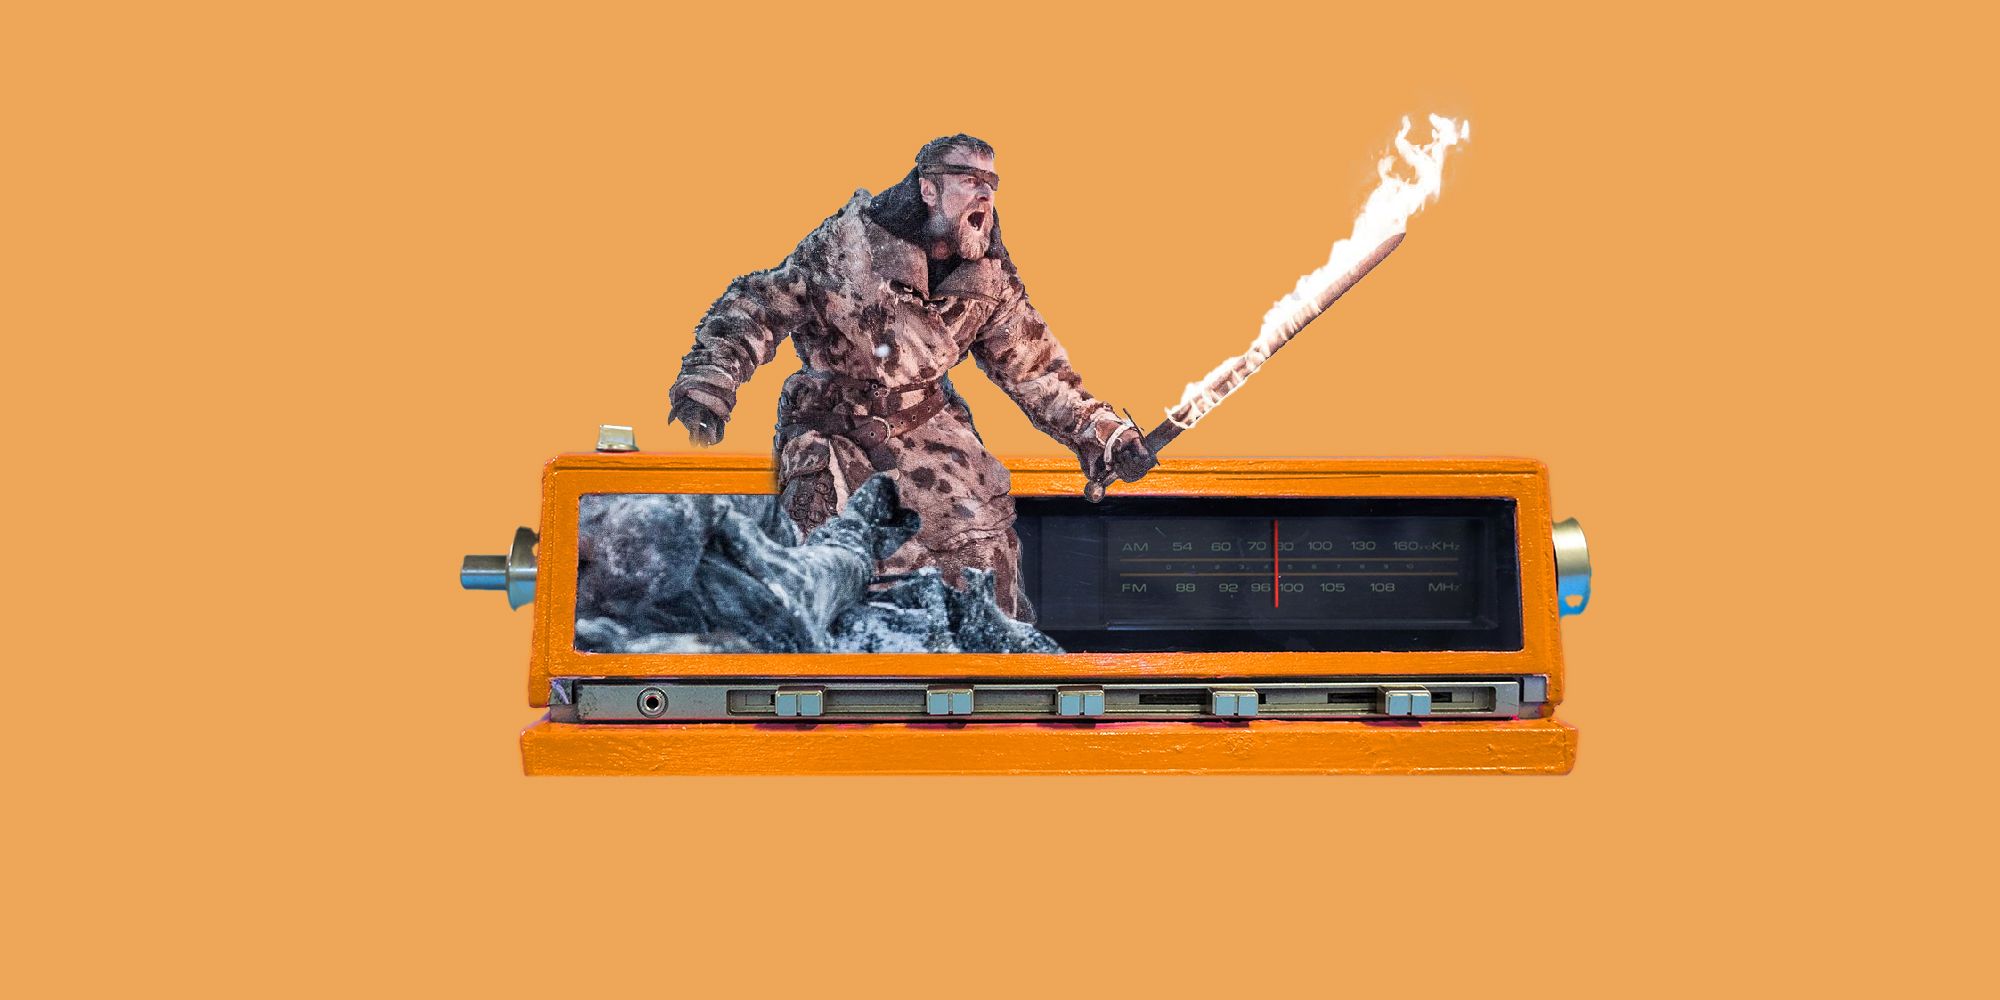 Game of Thrones character on a radio